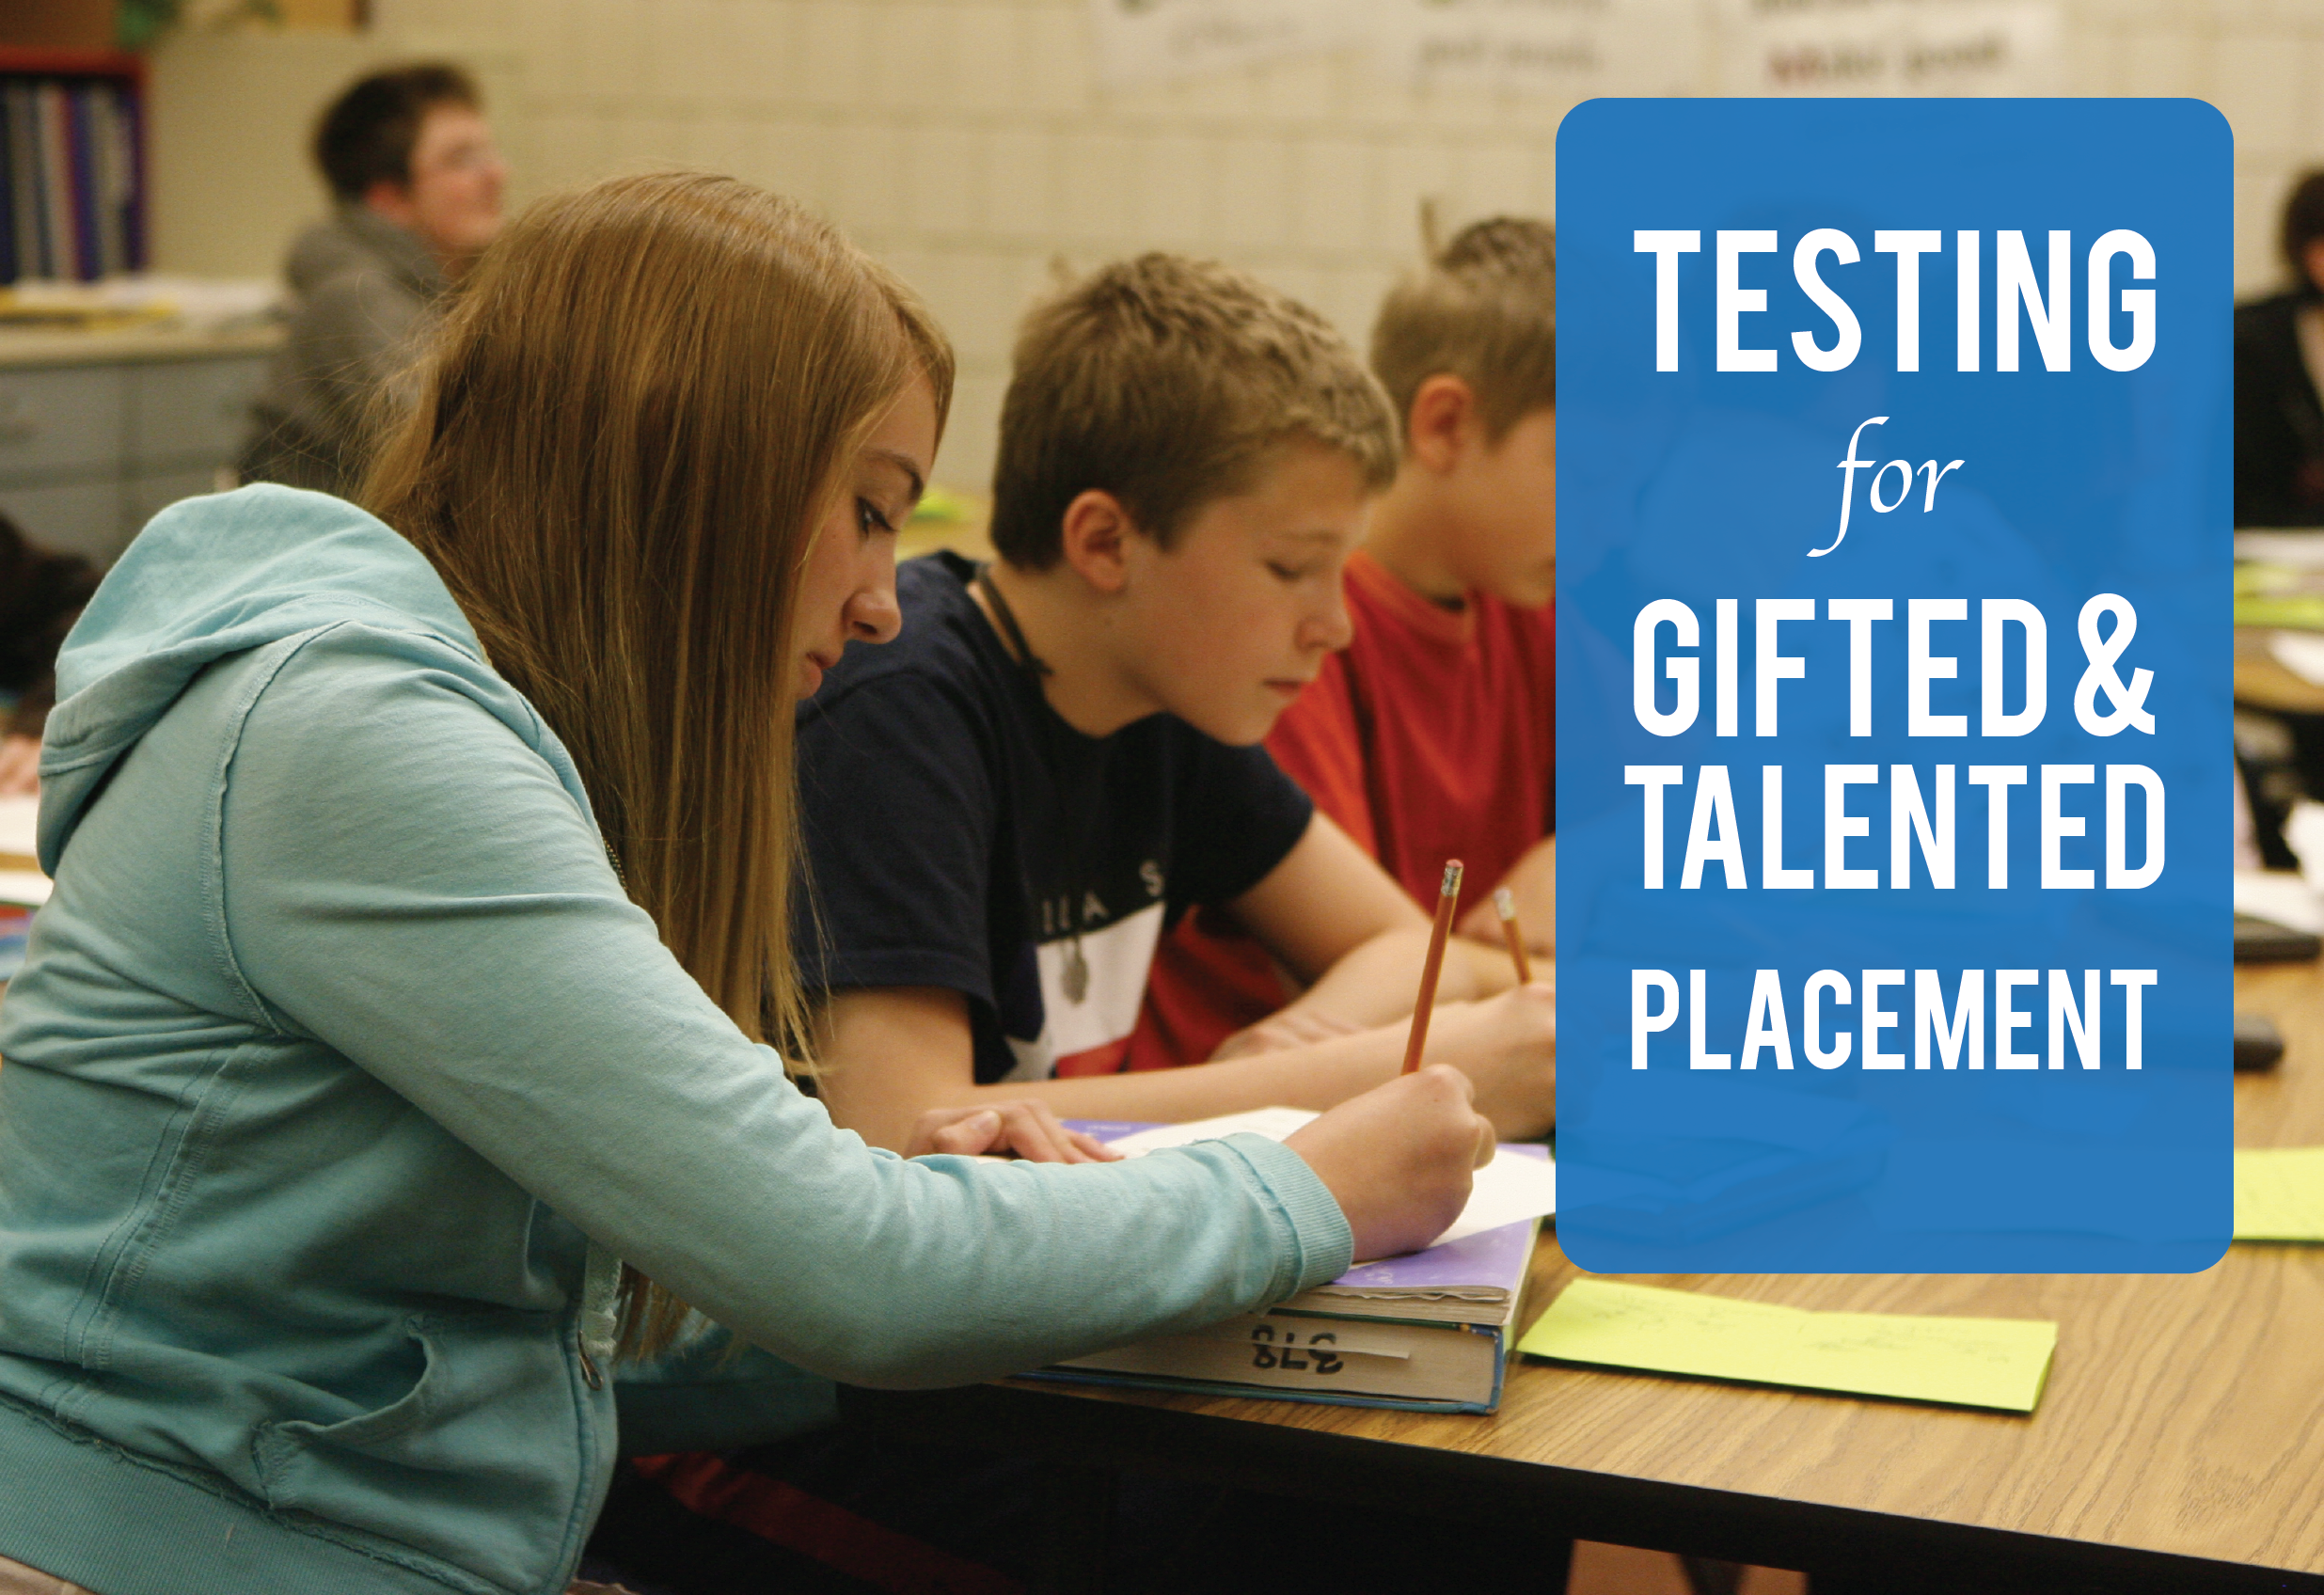 Testing for Gifted & Talented placement